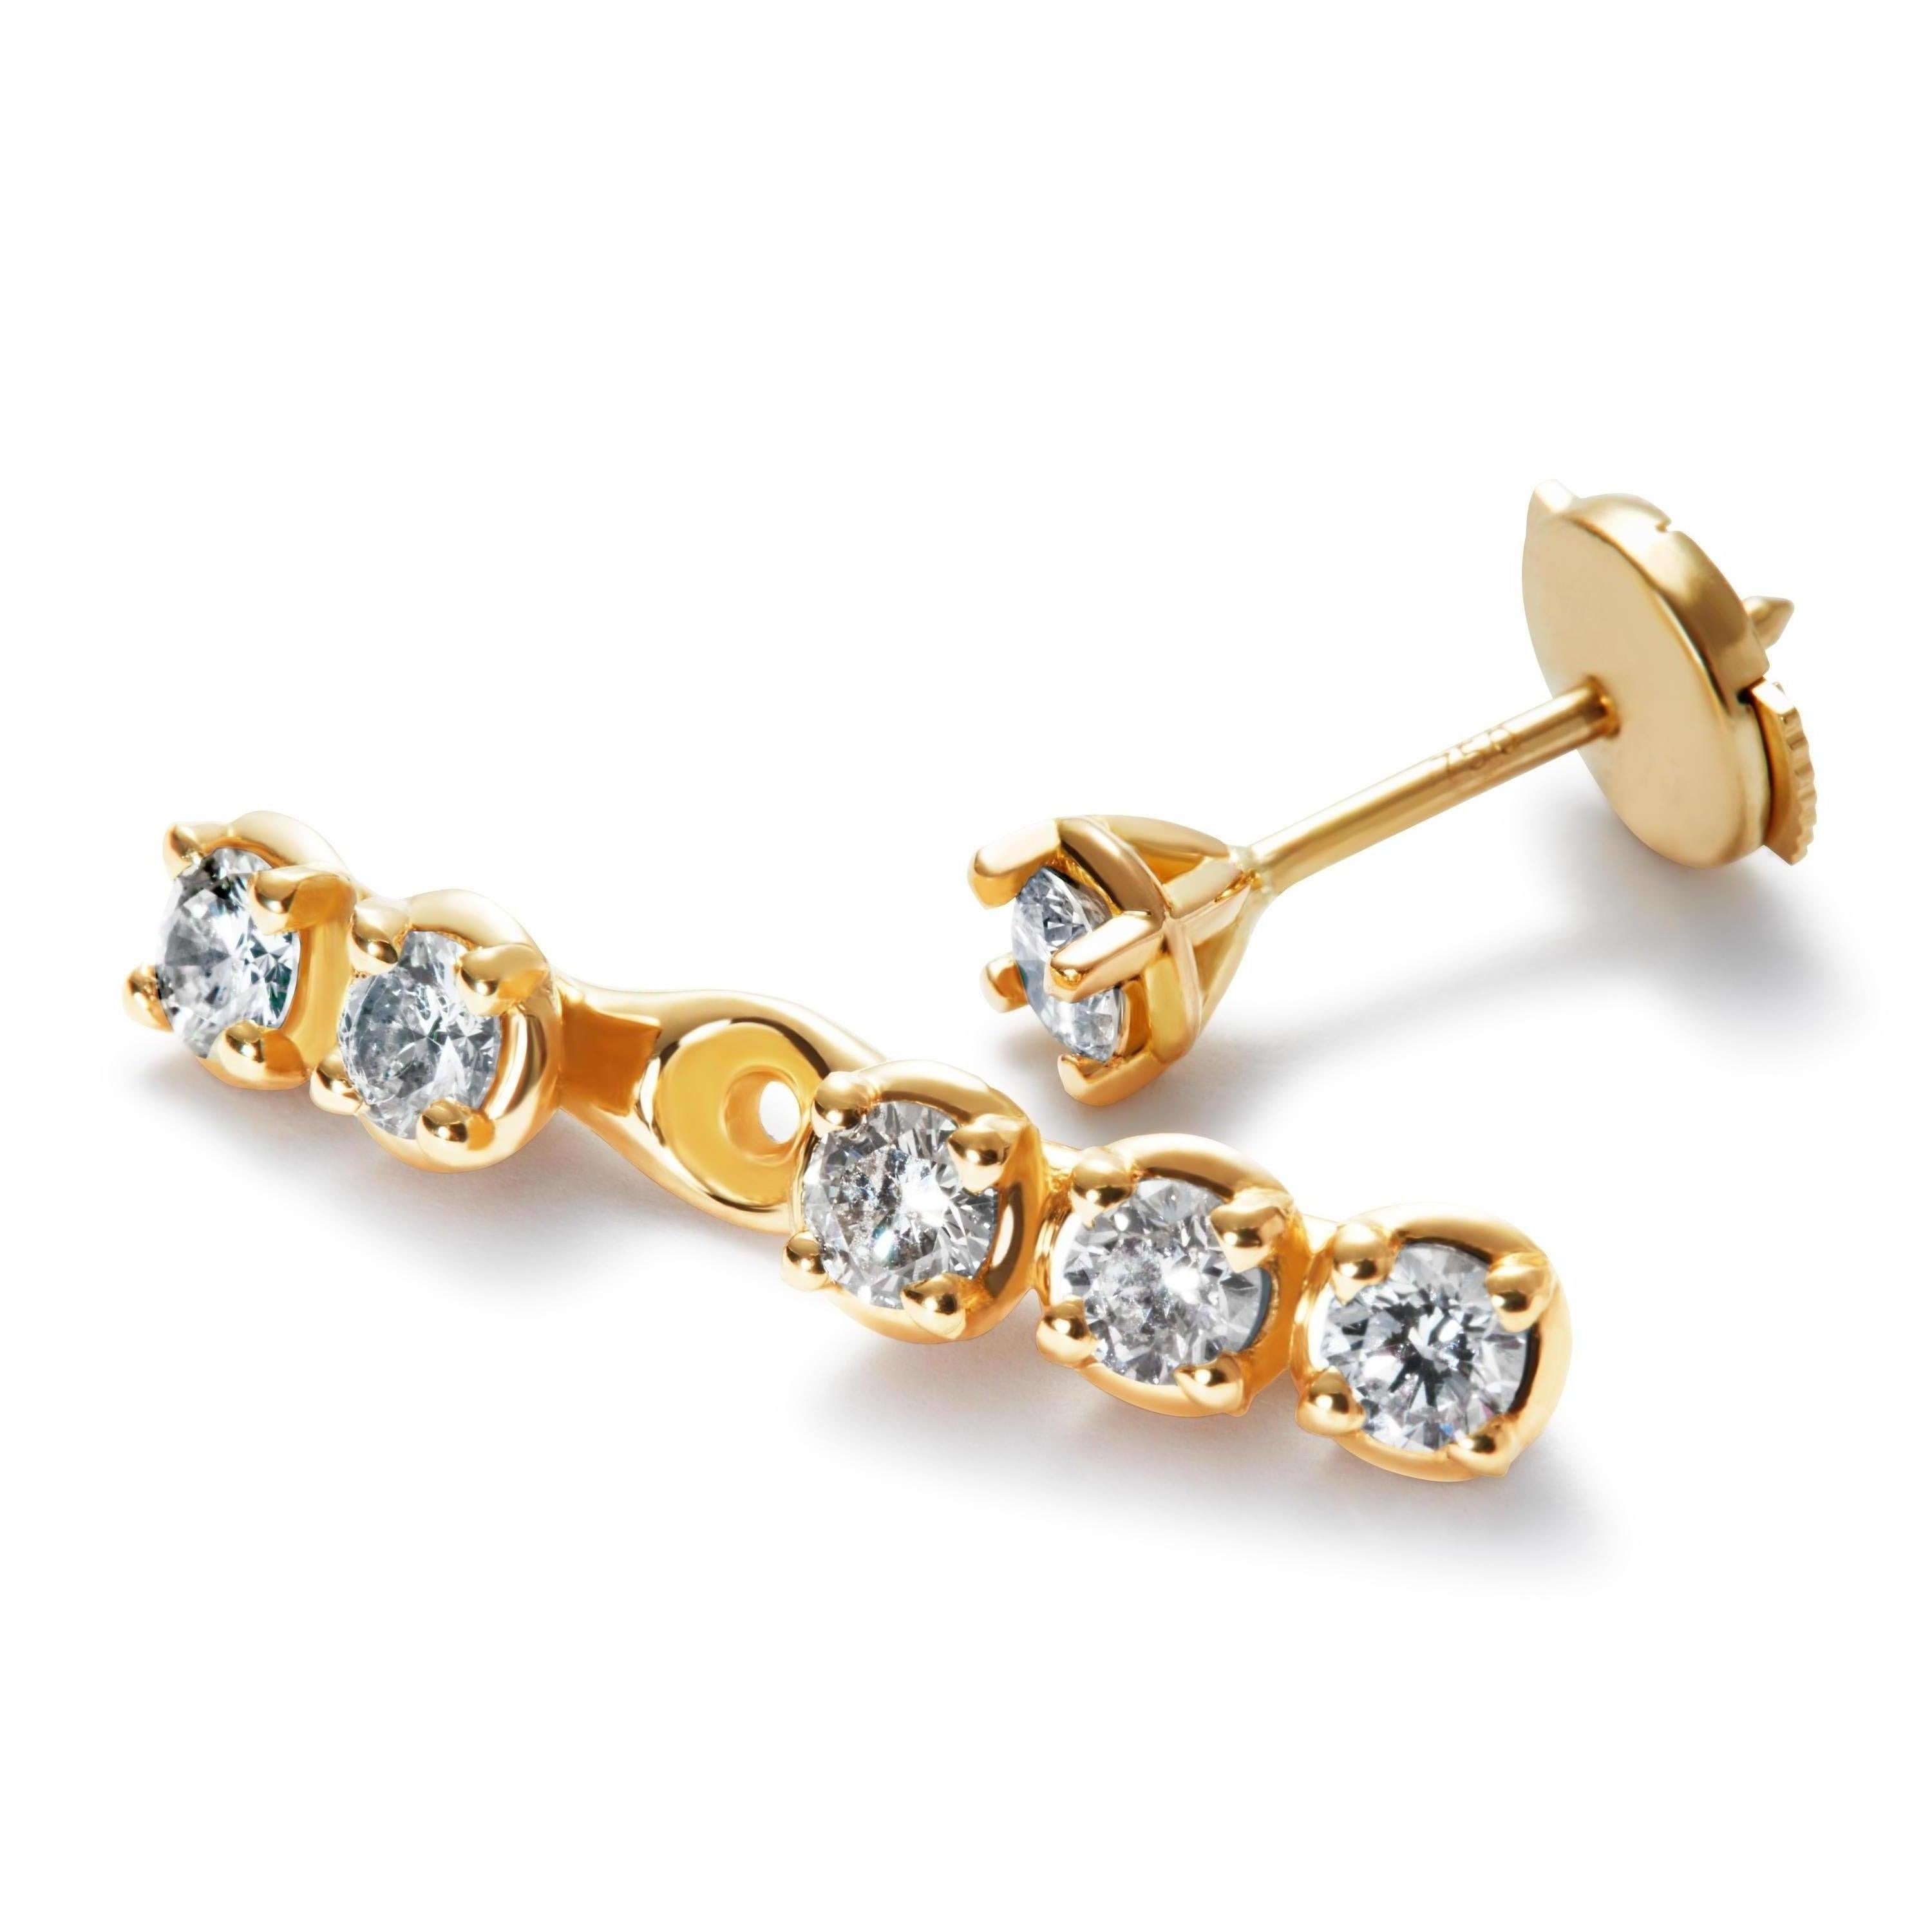 Rocks For Lifes two piece earring is with its distinctive design equally versatile and classic. It can be styled in many different ways. The setting of the six diamonds, a total of 0.66 carat, is designed to maximise the brilliance and luminosity of